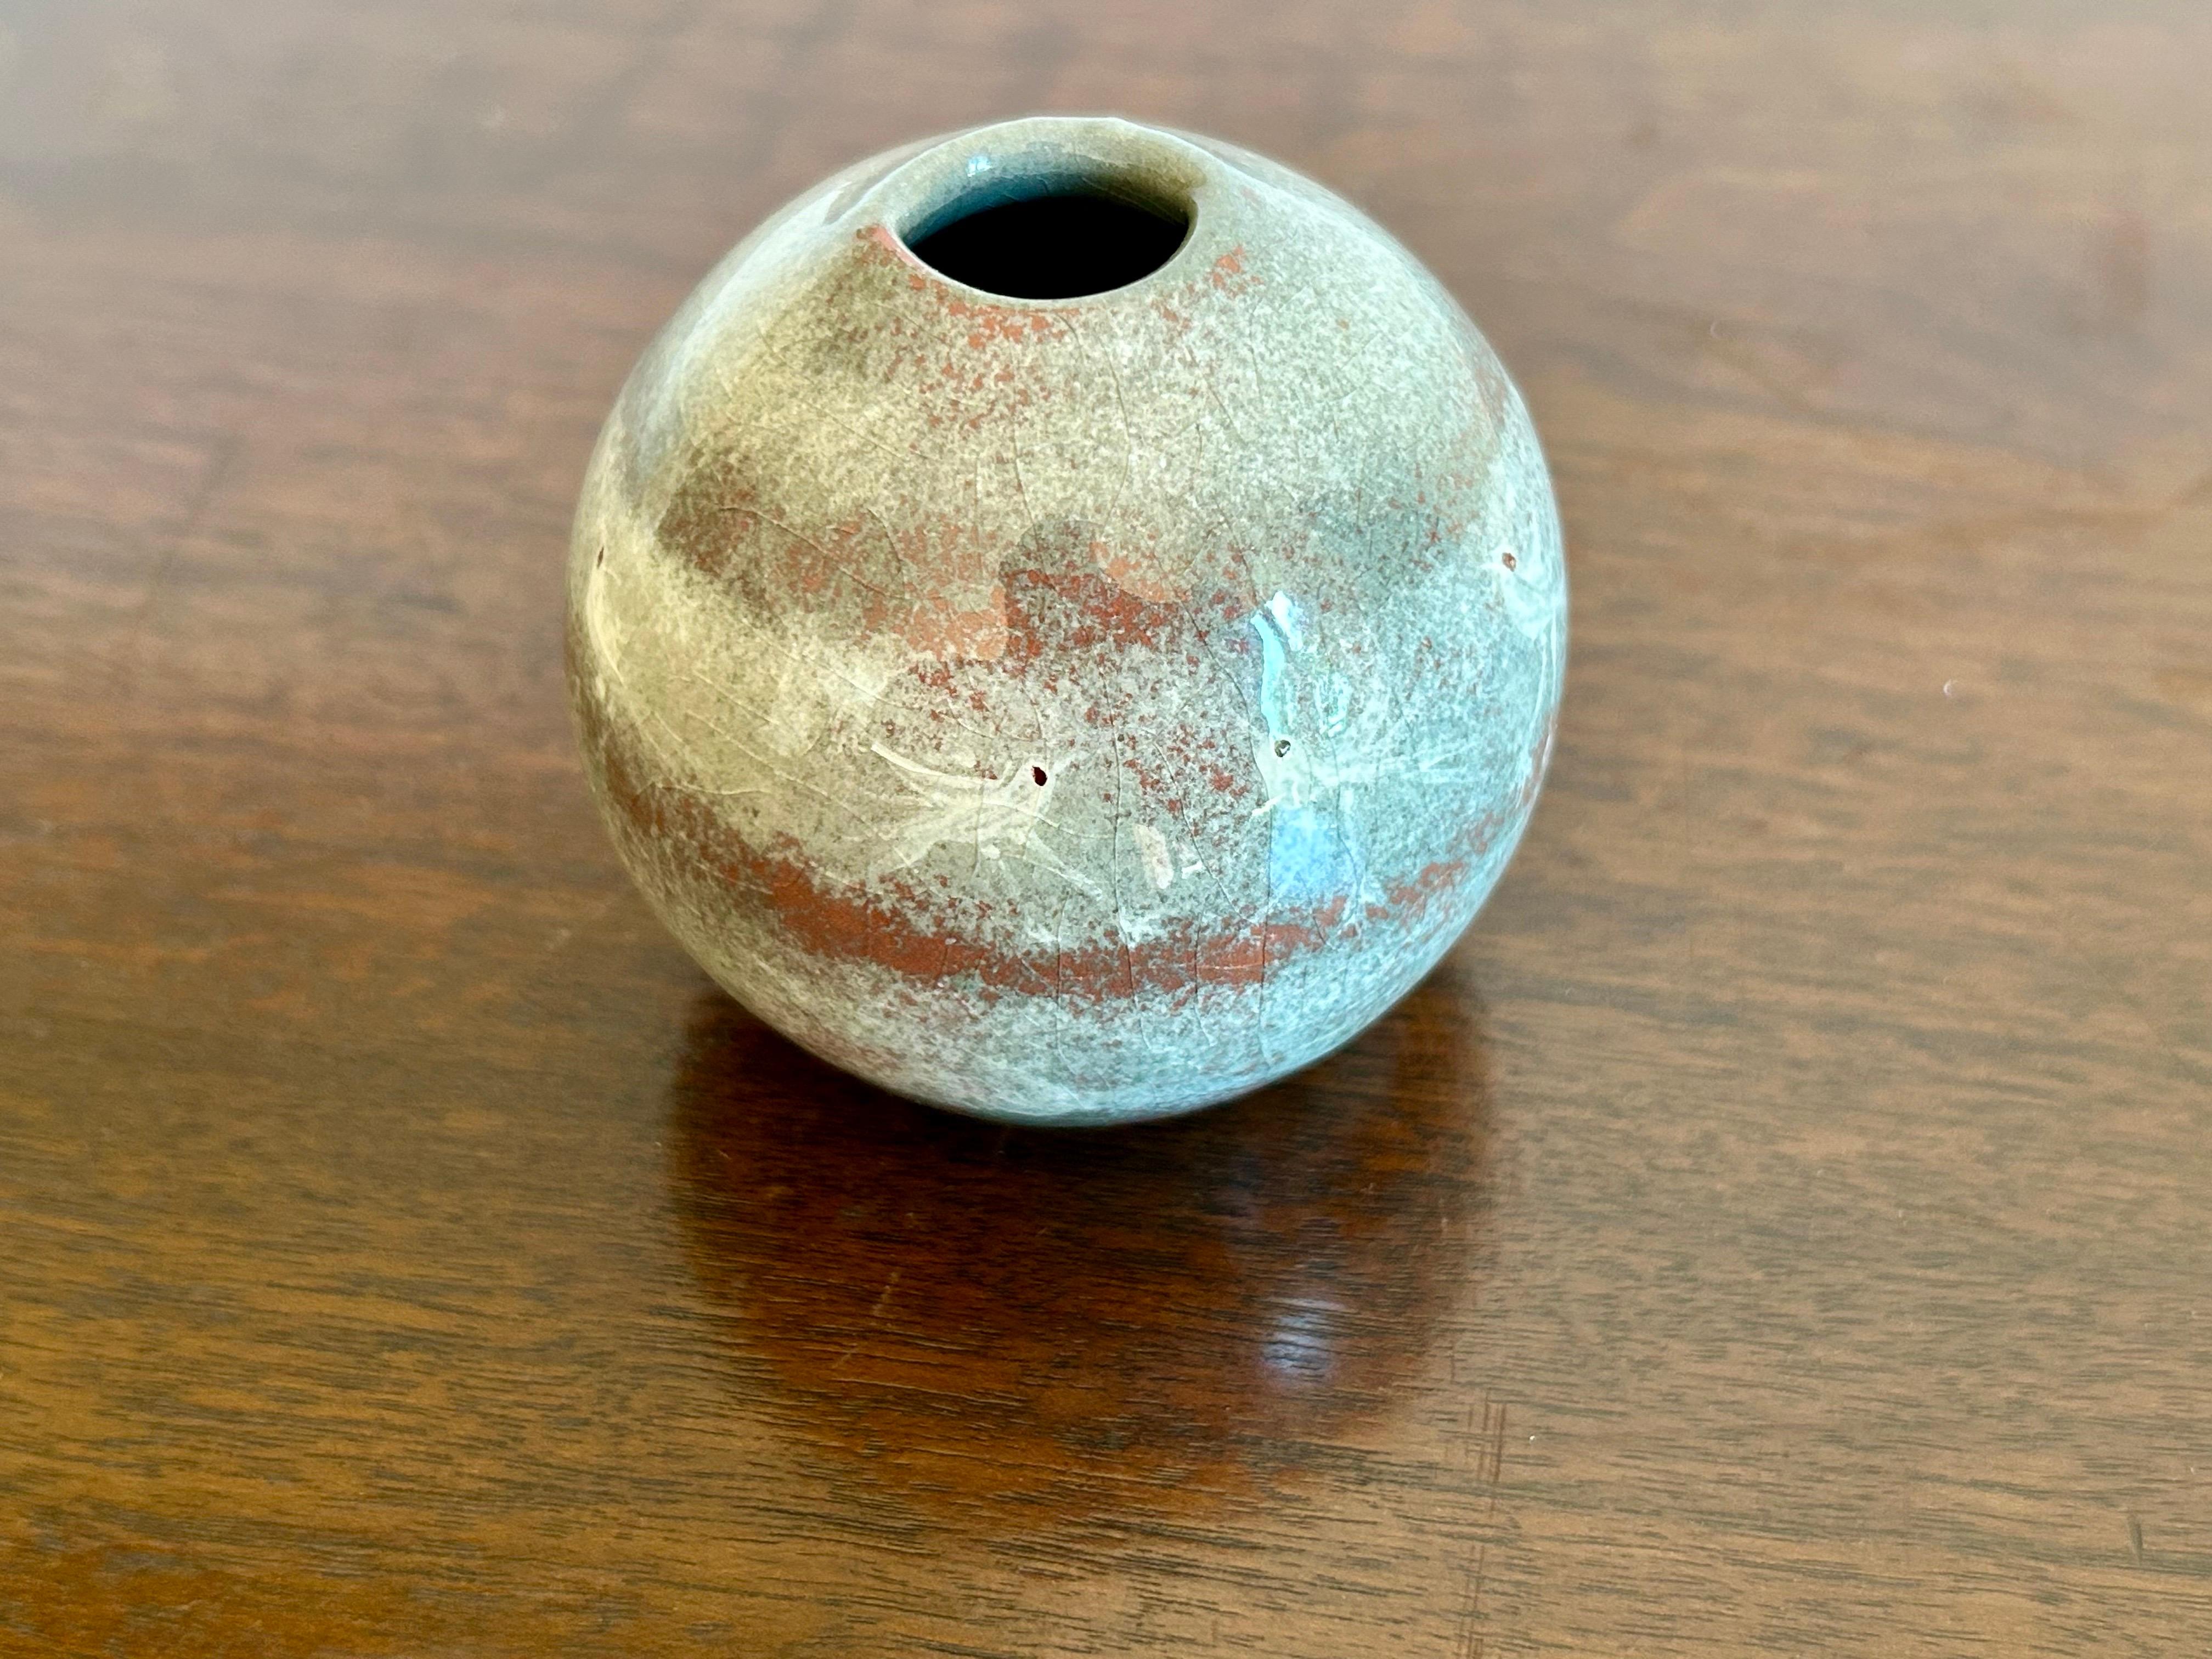 American Studio Pottery Weed Vase Polia Pillin For Sale